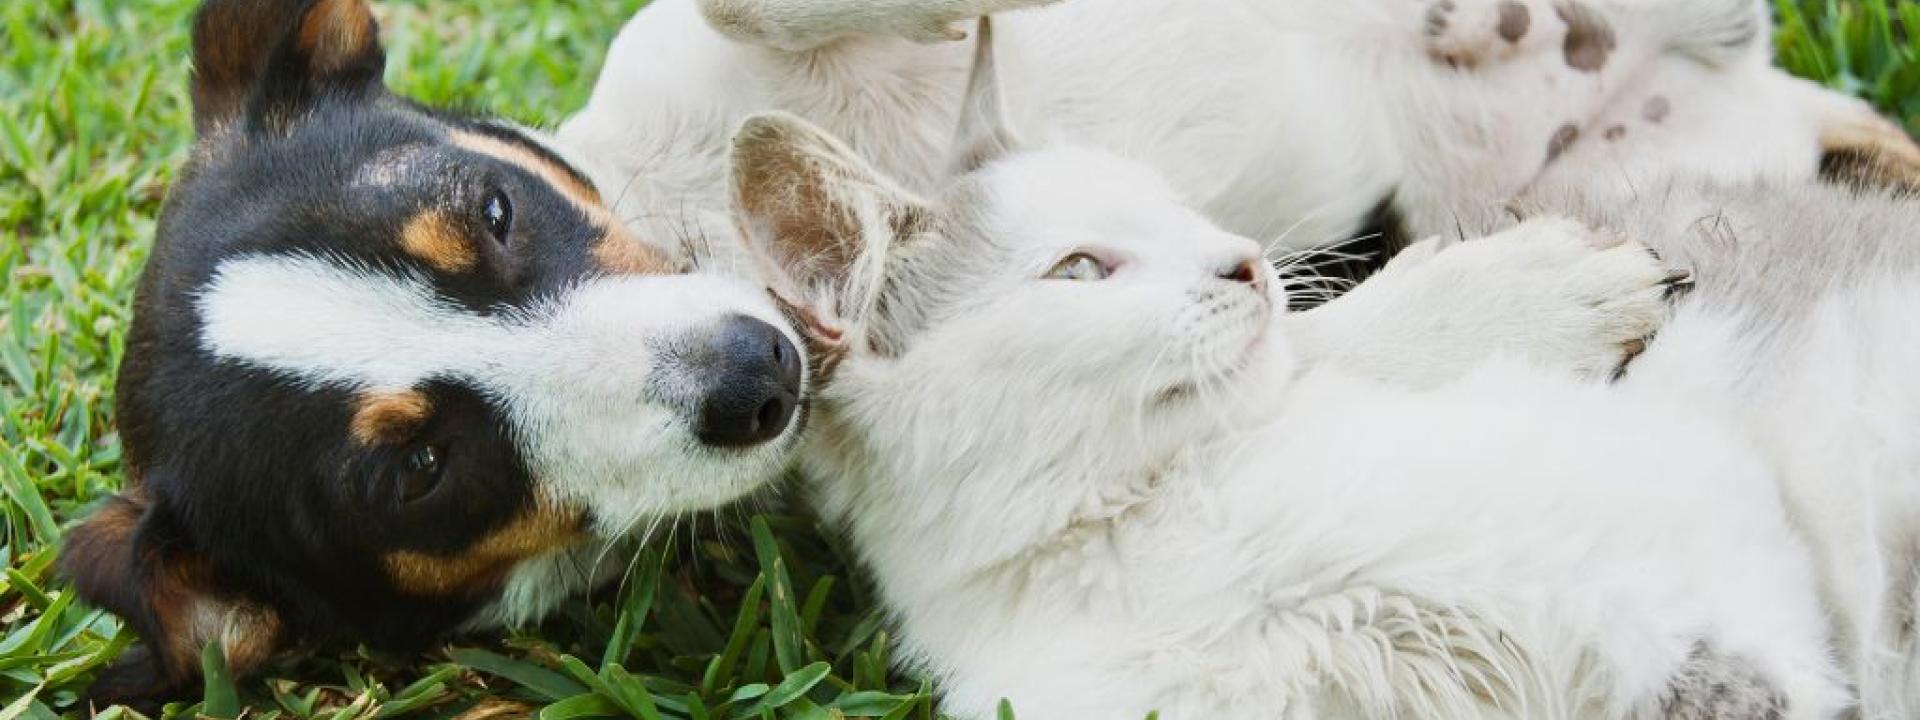 Healthy dog and cat on grass.